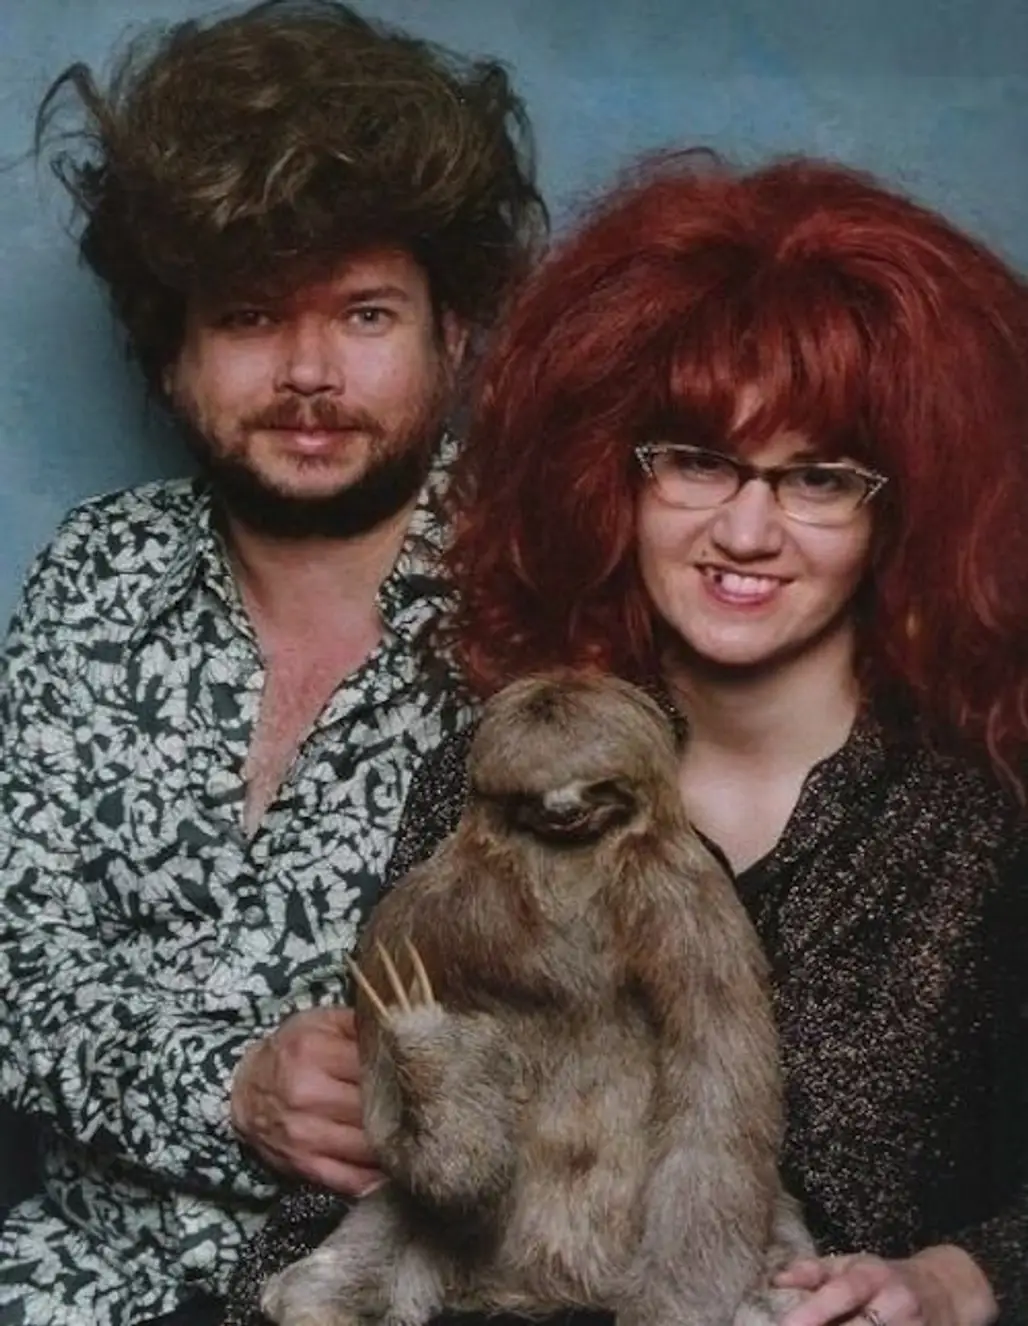 Sloth... and Wigs?